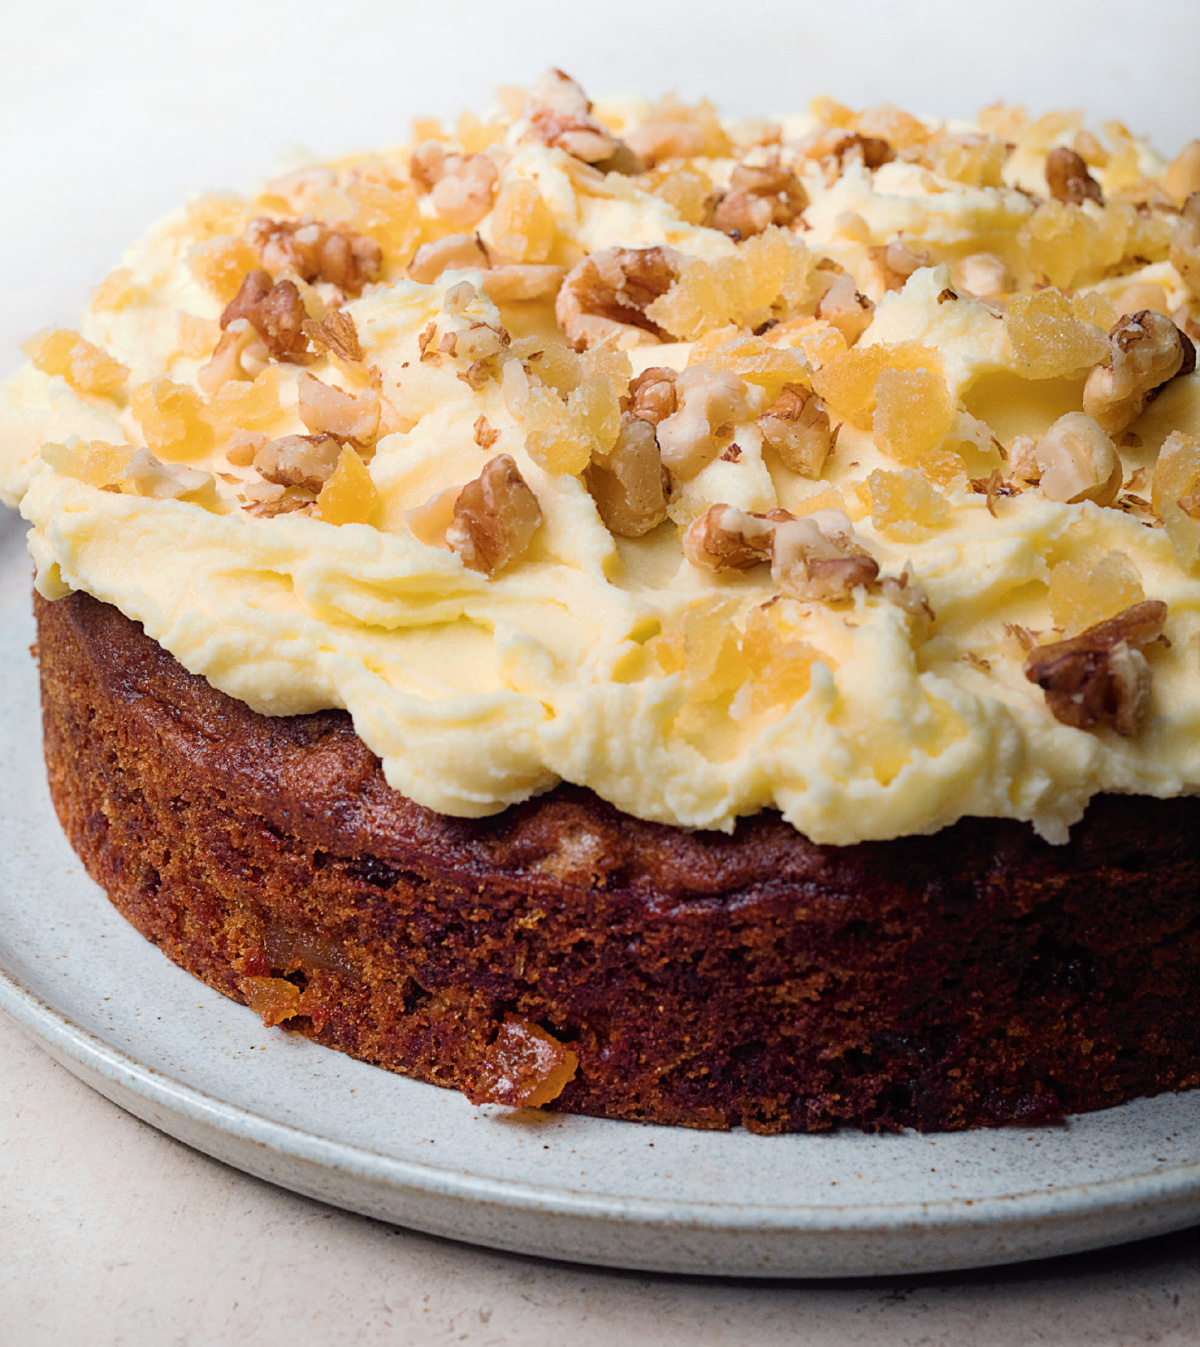 Image of Nigella's Ginger and Walnut Carrot Cake